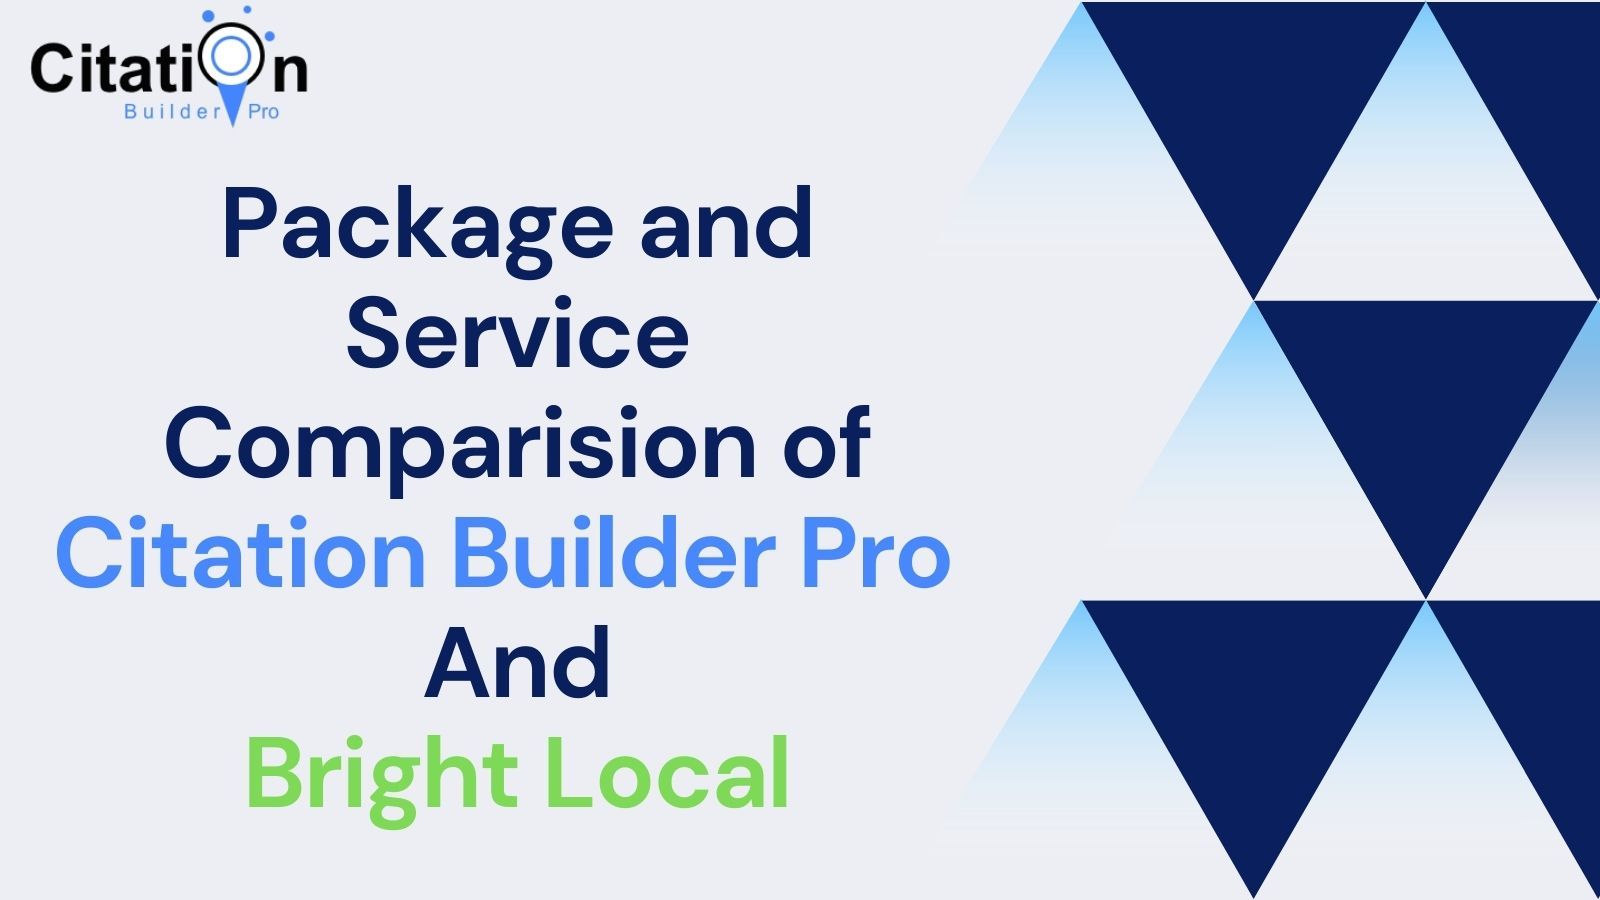 packages-and-service-comparision-of-citation-builder-pro-and-bright-local